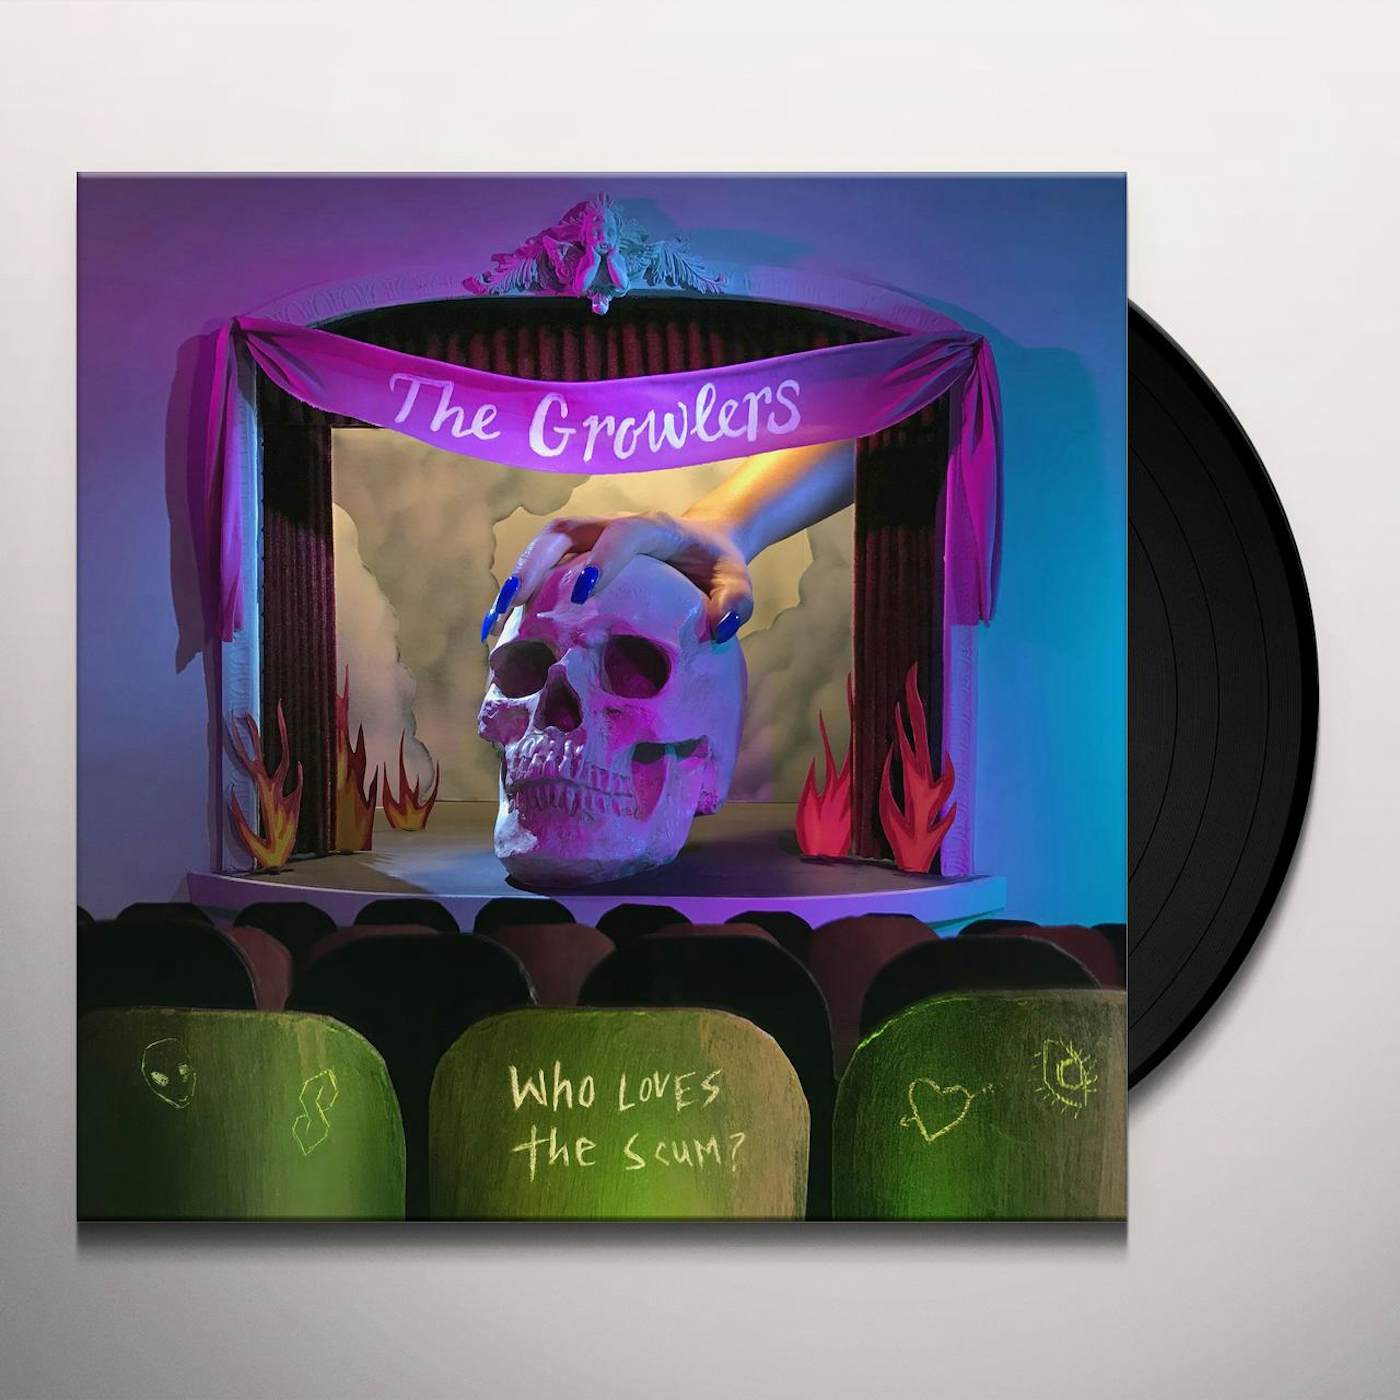 The Growlers "Who Loves The Scum?" Seven Inch Single (Vinyl)